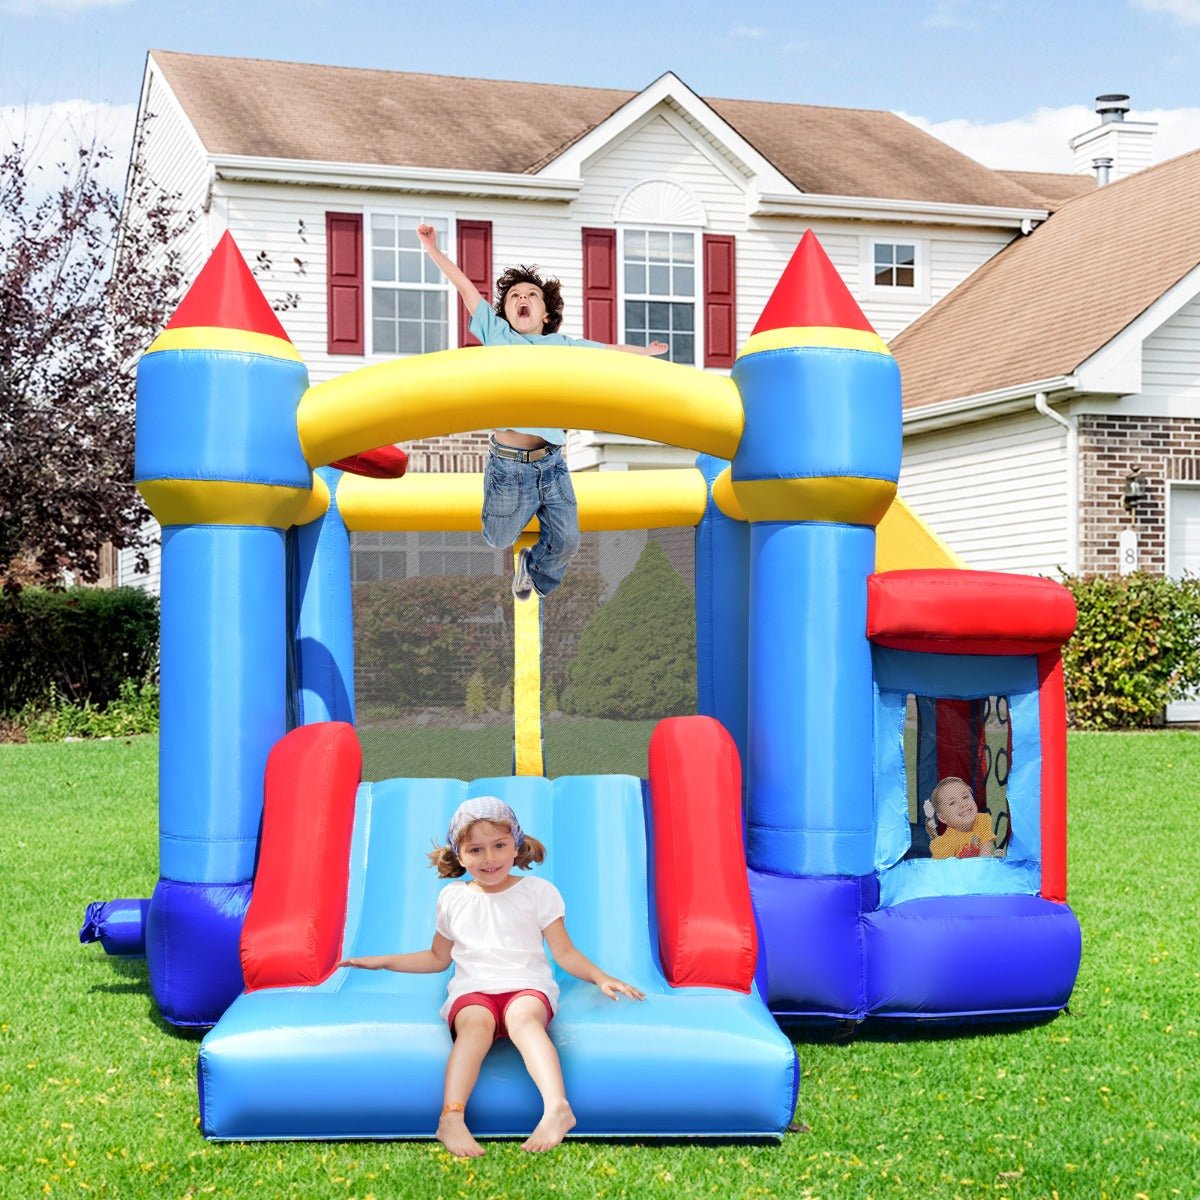 Active Playtime: Inflatable Jumping Castle with Slide for Kids Adventure